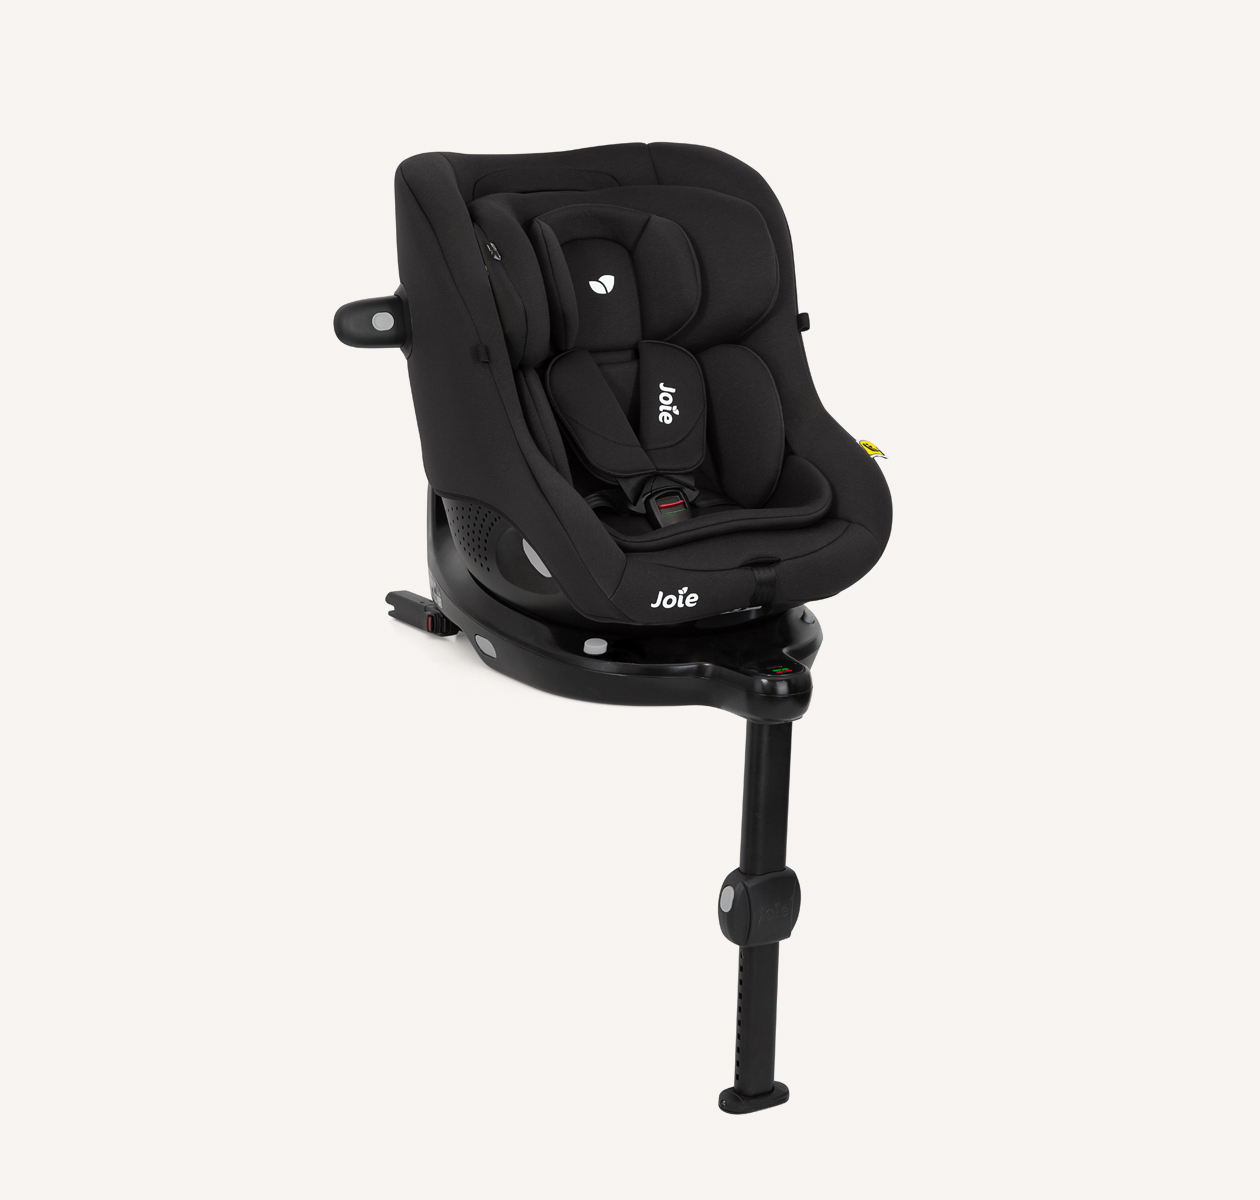 Joie i-Pivot 360 car seat in black at an angle